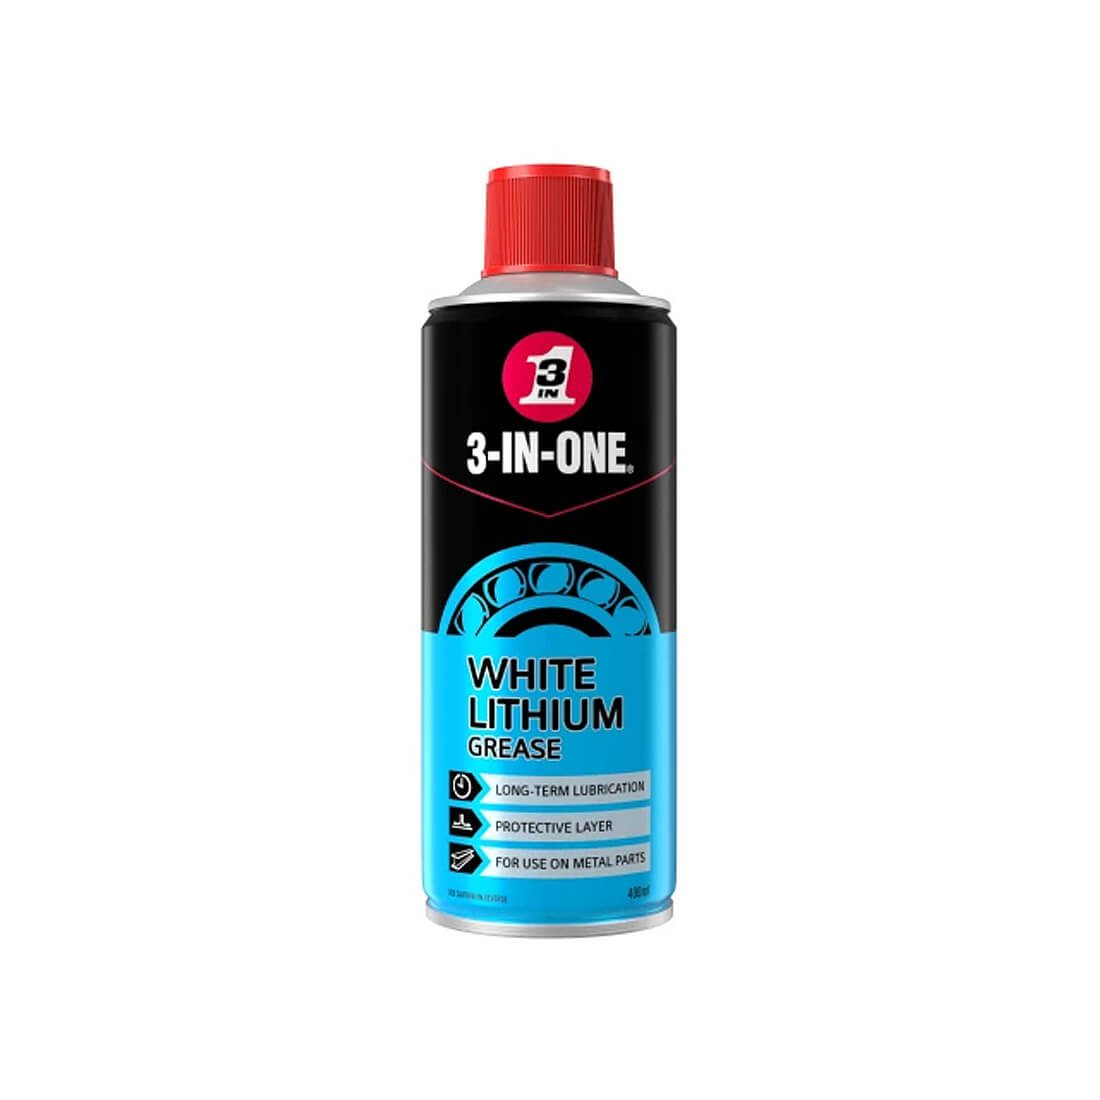 Spray can of 3-IN-ONE White Lithium Spray Grease 400ml which offer a spray protective layer, it's also a long term lubricant and can be applied on metal parts.